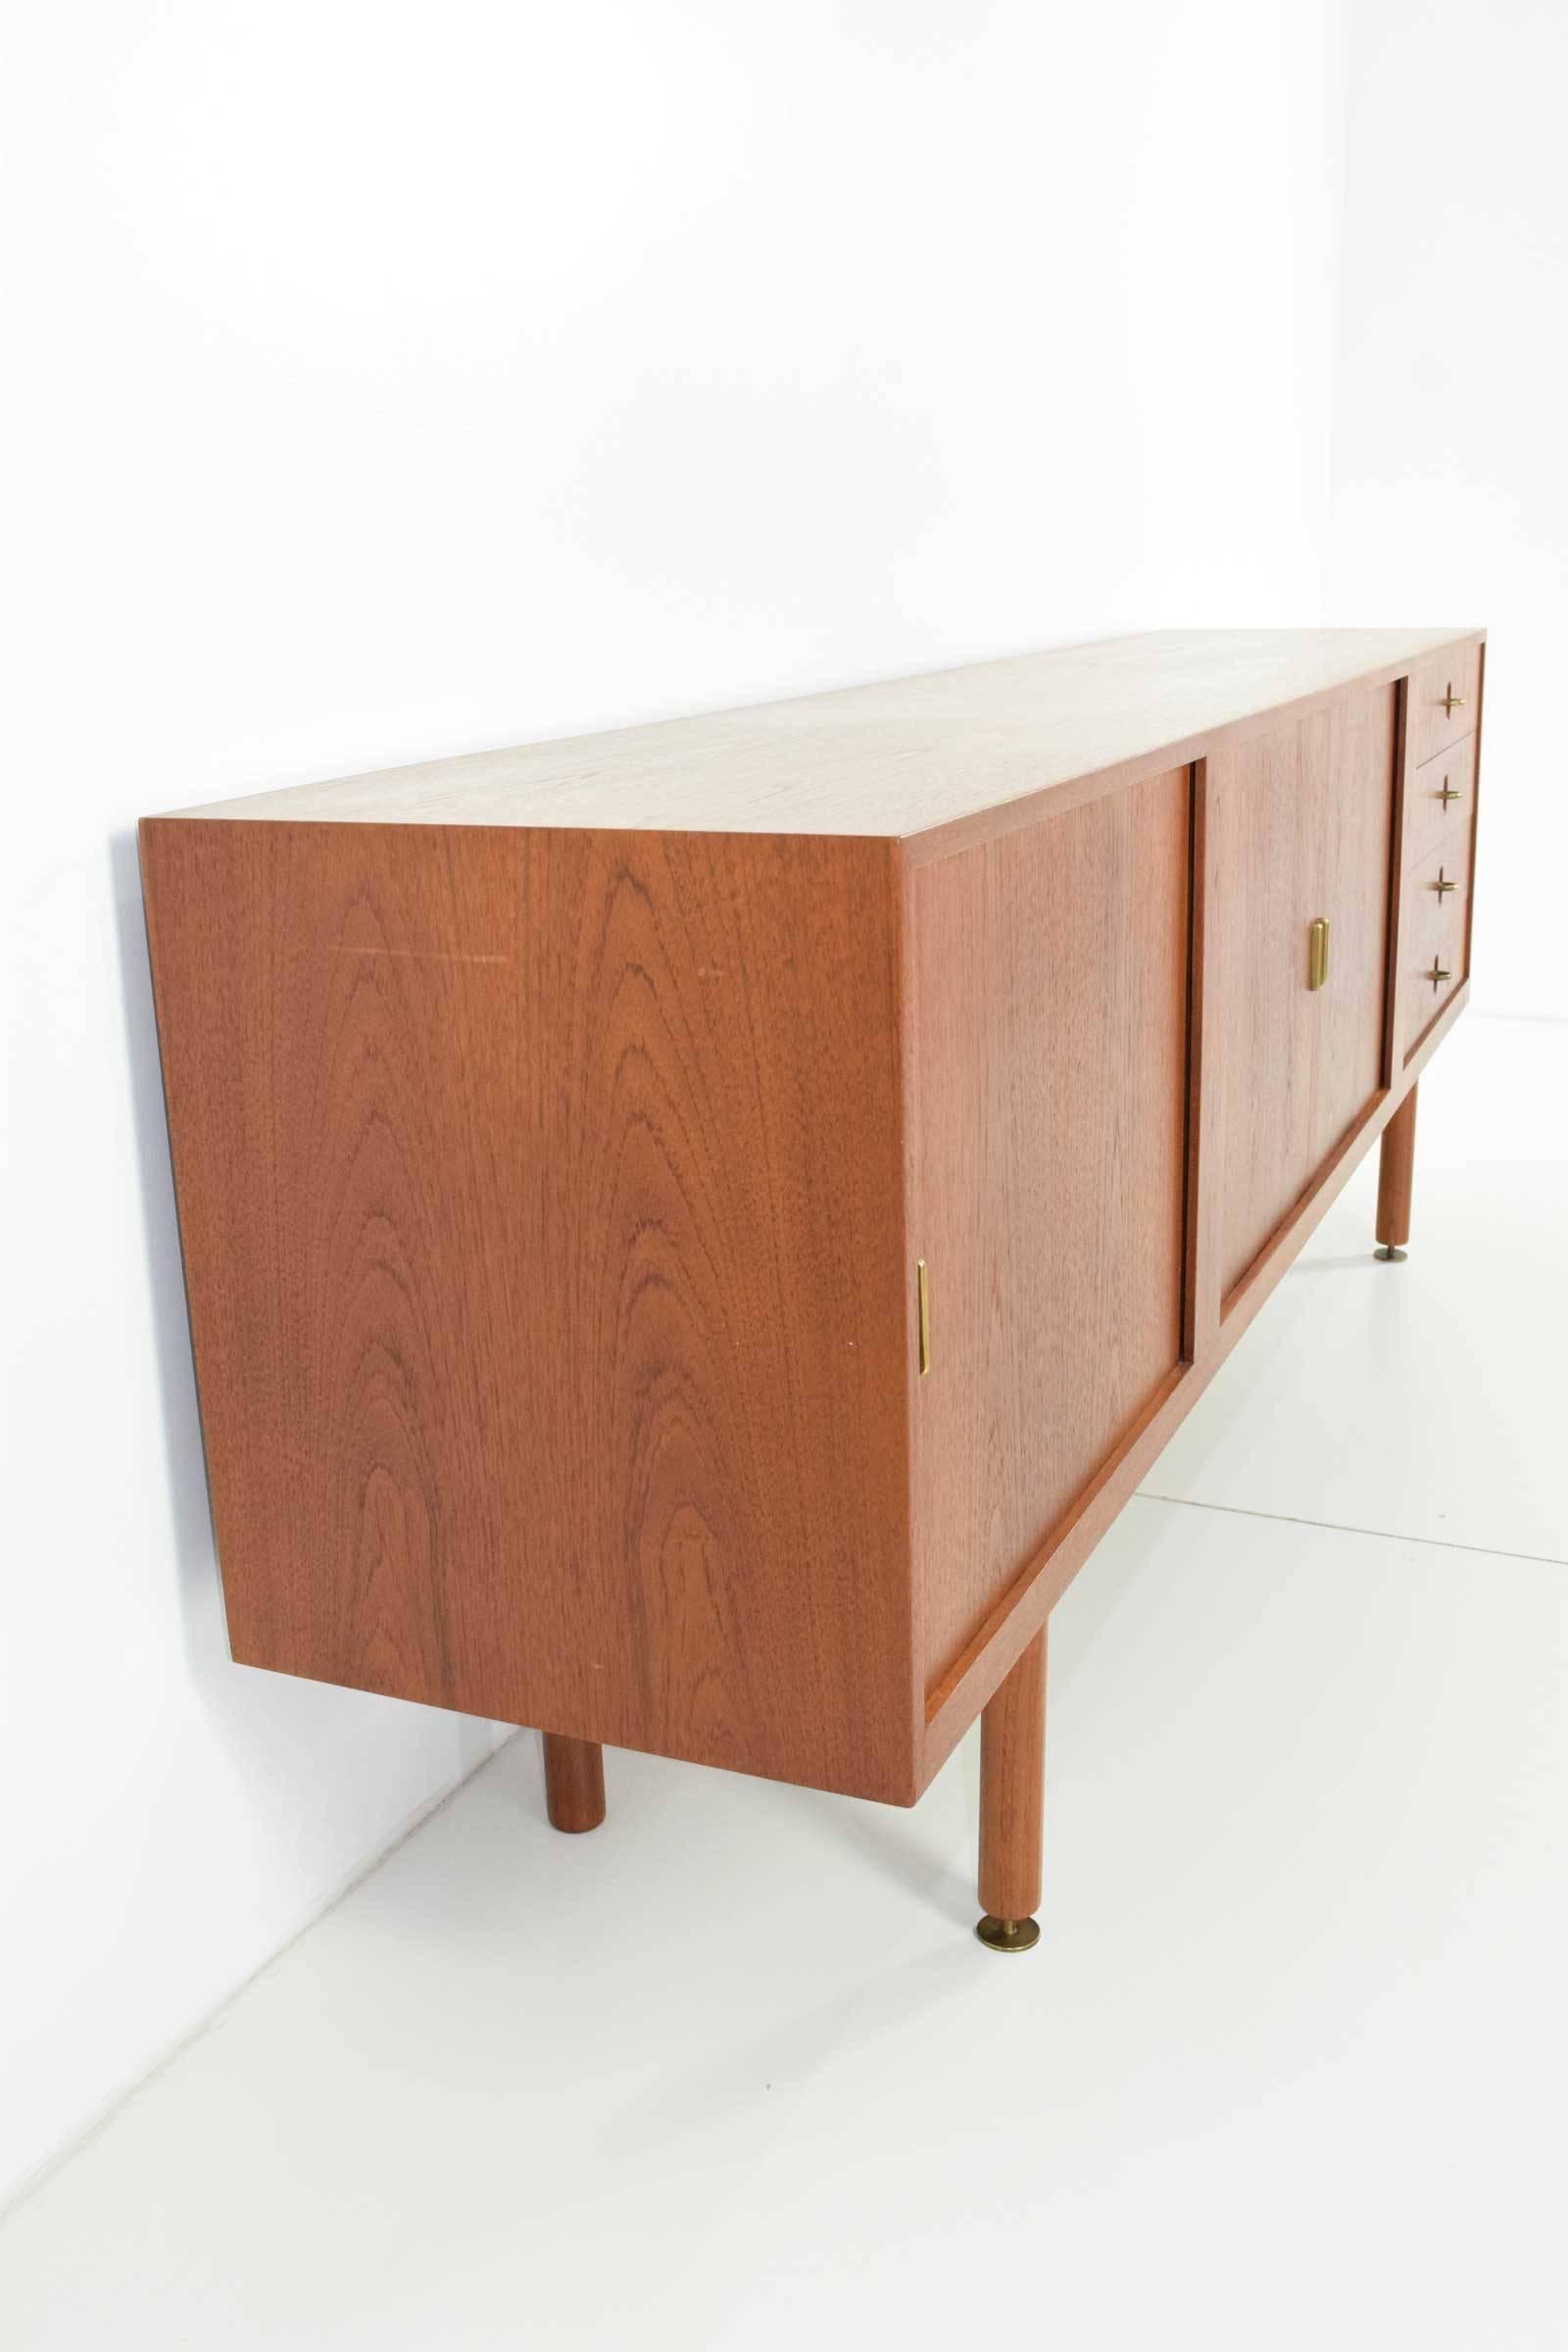 This is a gorgeous credenza/sideboard in teak. Has three tambour doors that recess into credenza when open, interior is fully finished as well as back so the piece can float in a room if desired. Hardware is solid brass, decorative leveling feet on